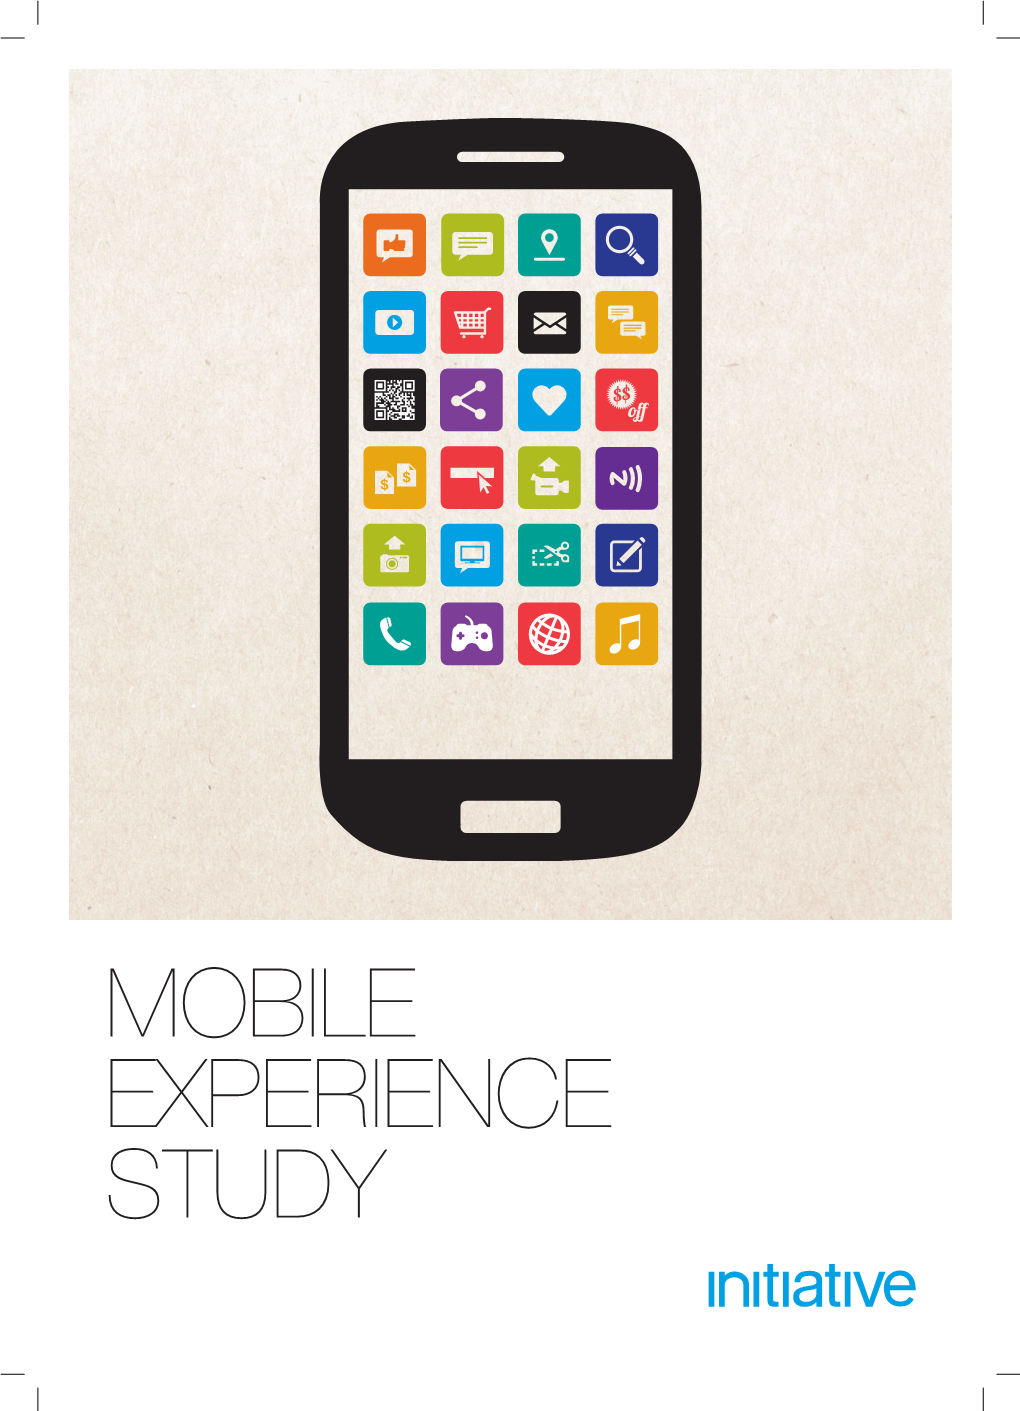 Mobile Experience Study 1234567